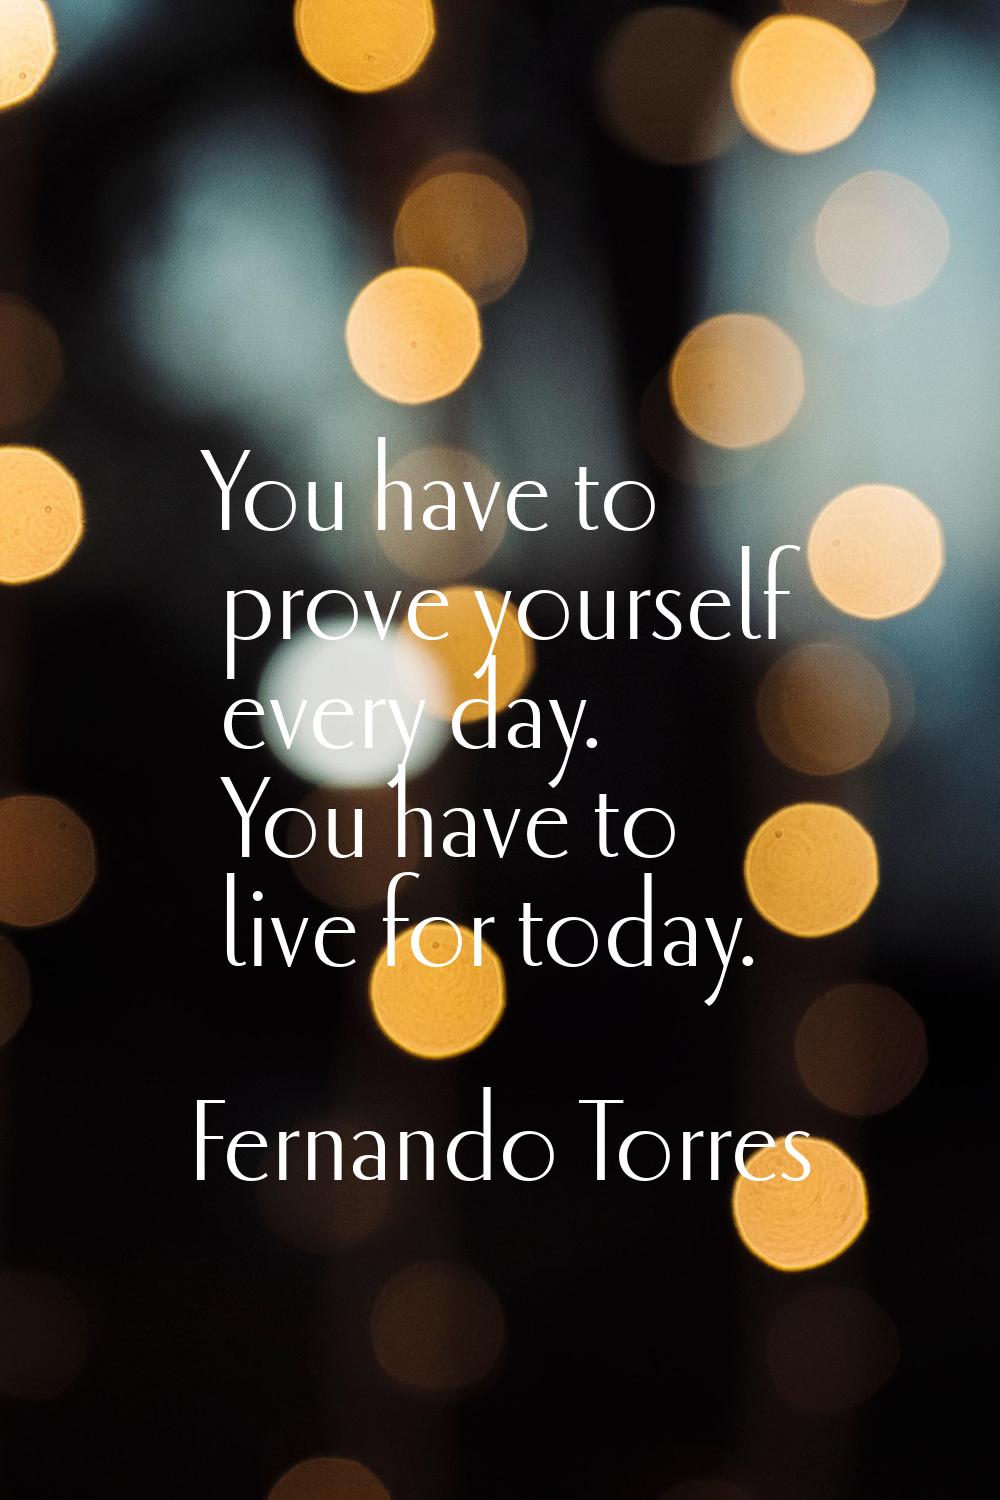 You have to prove yourself every day. You have to live for today.